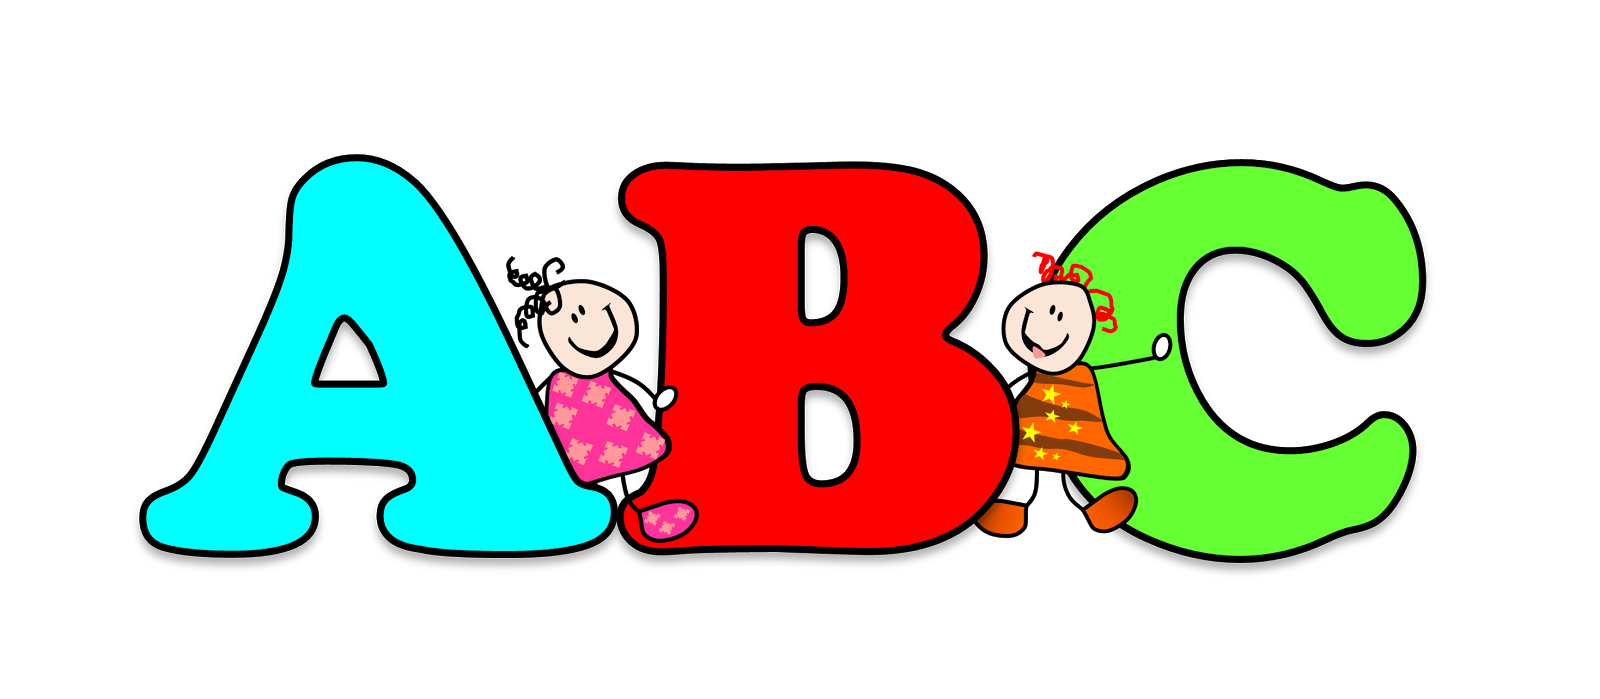 free clipart images of alphabet - photo #50